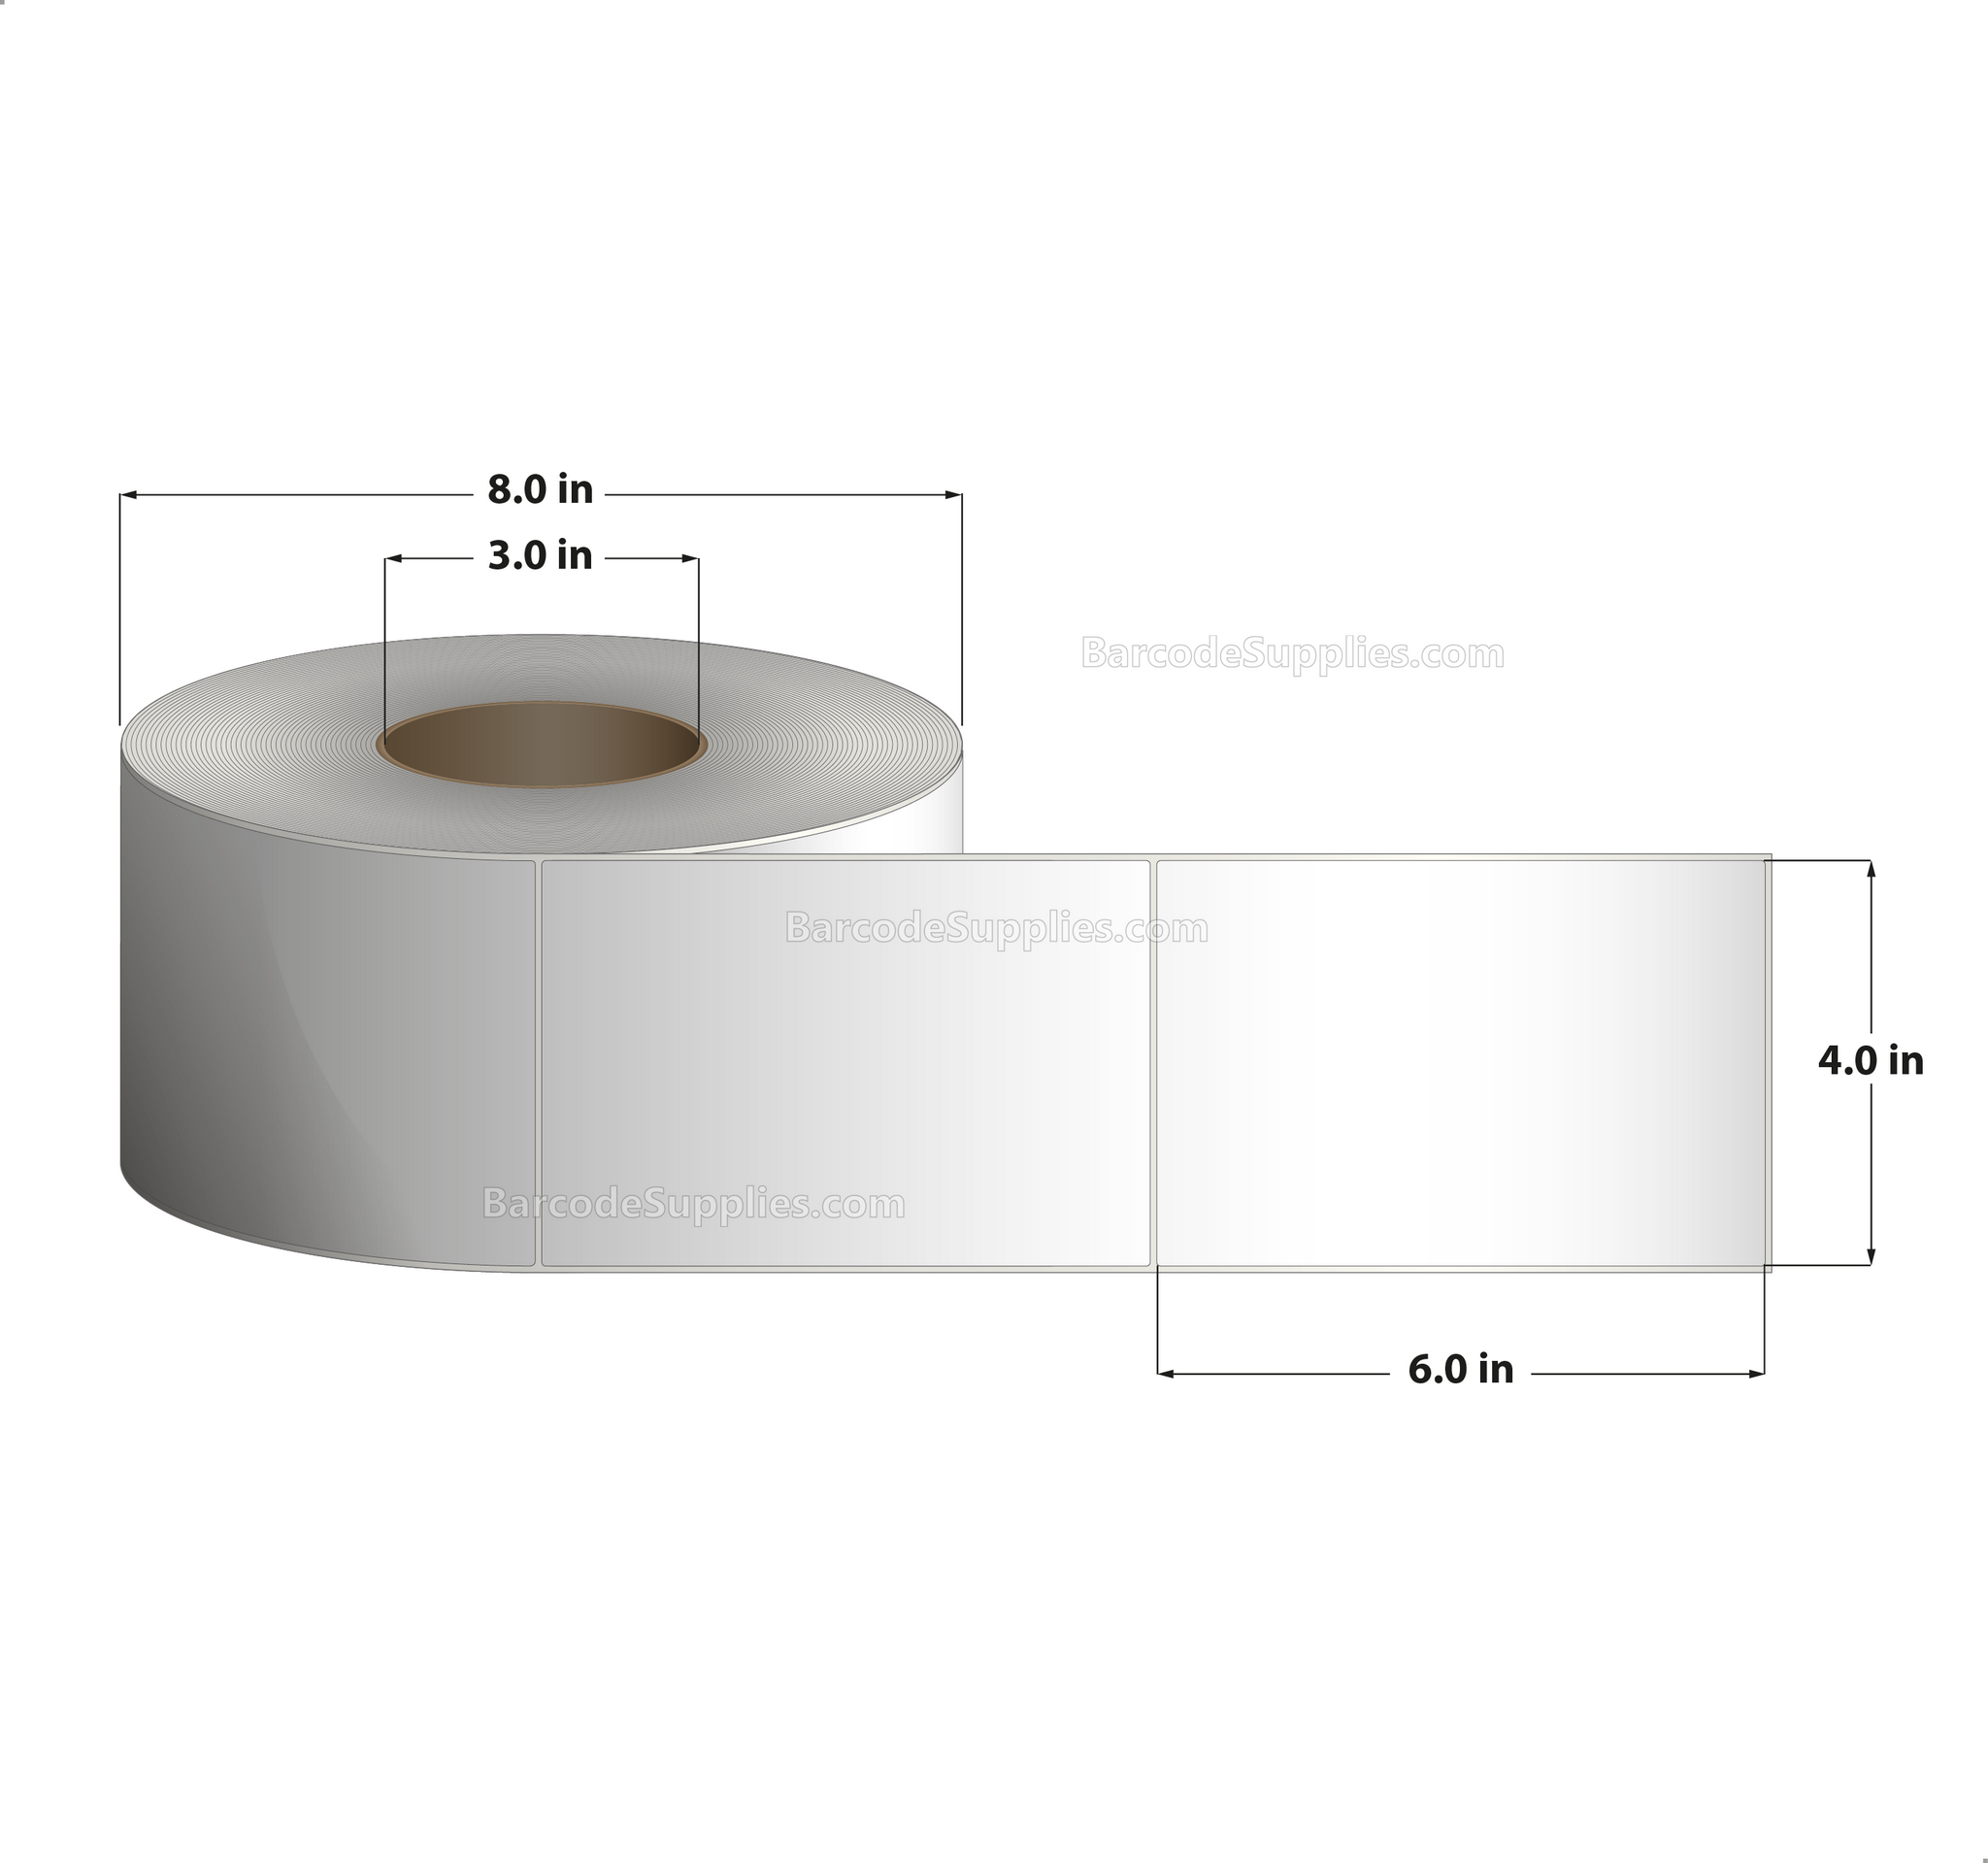 4 x 6 Direct Thermal White Labels With Acrylic Adhesive - No Perforation - 2800 Labels Per Roll - Carton Of 3 Rolls - 8400 Labels Total - MPN: RD-4-6-2800-NP